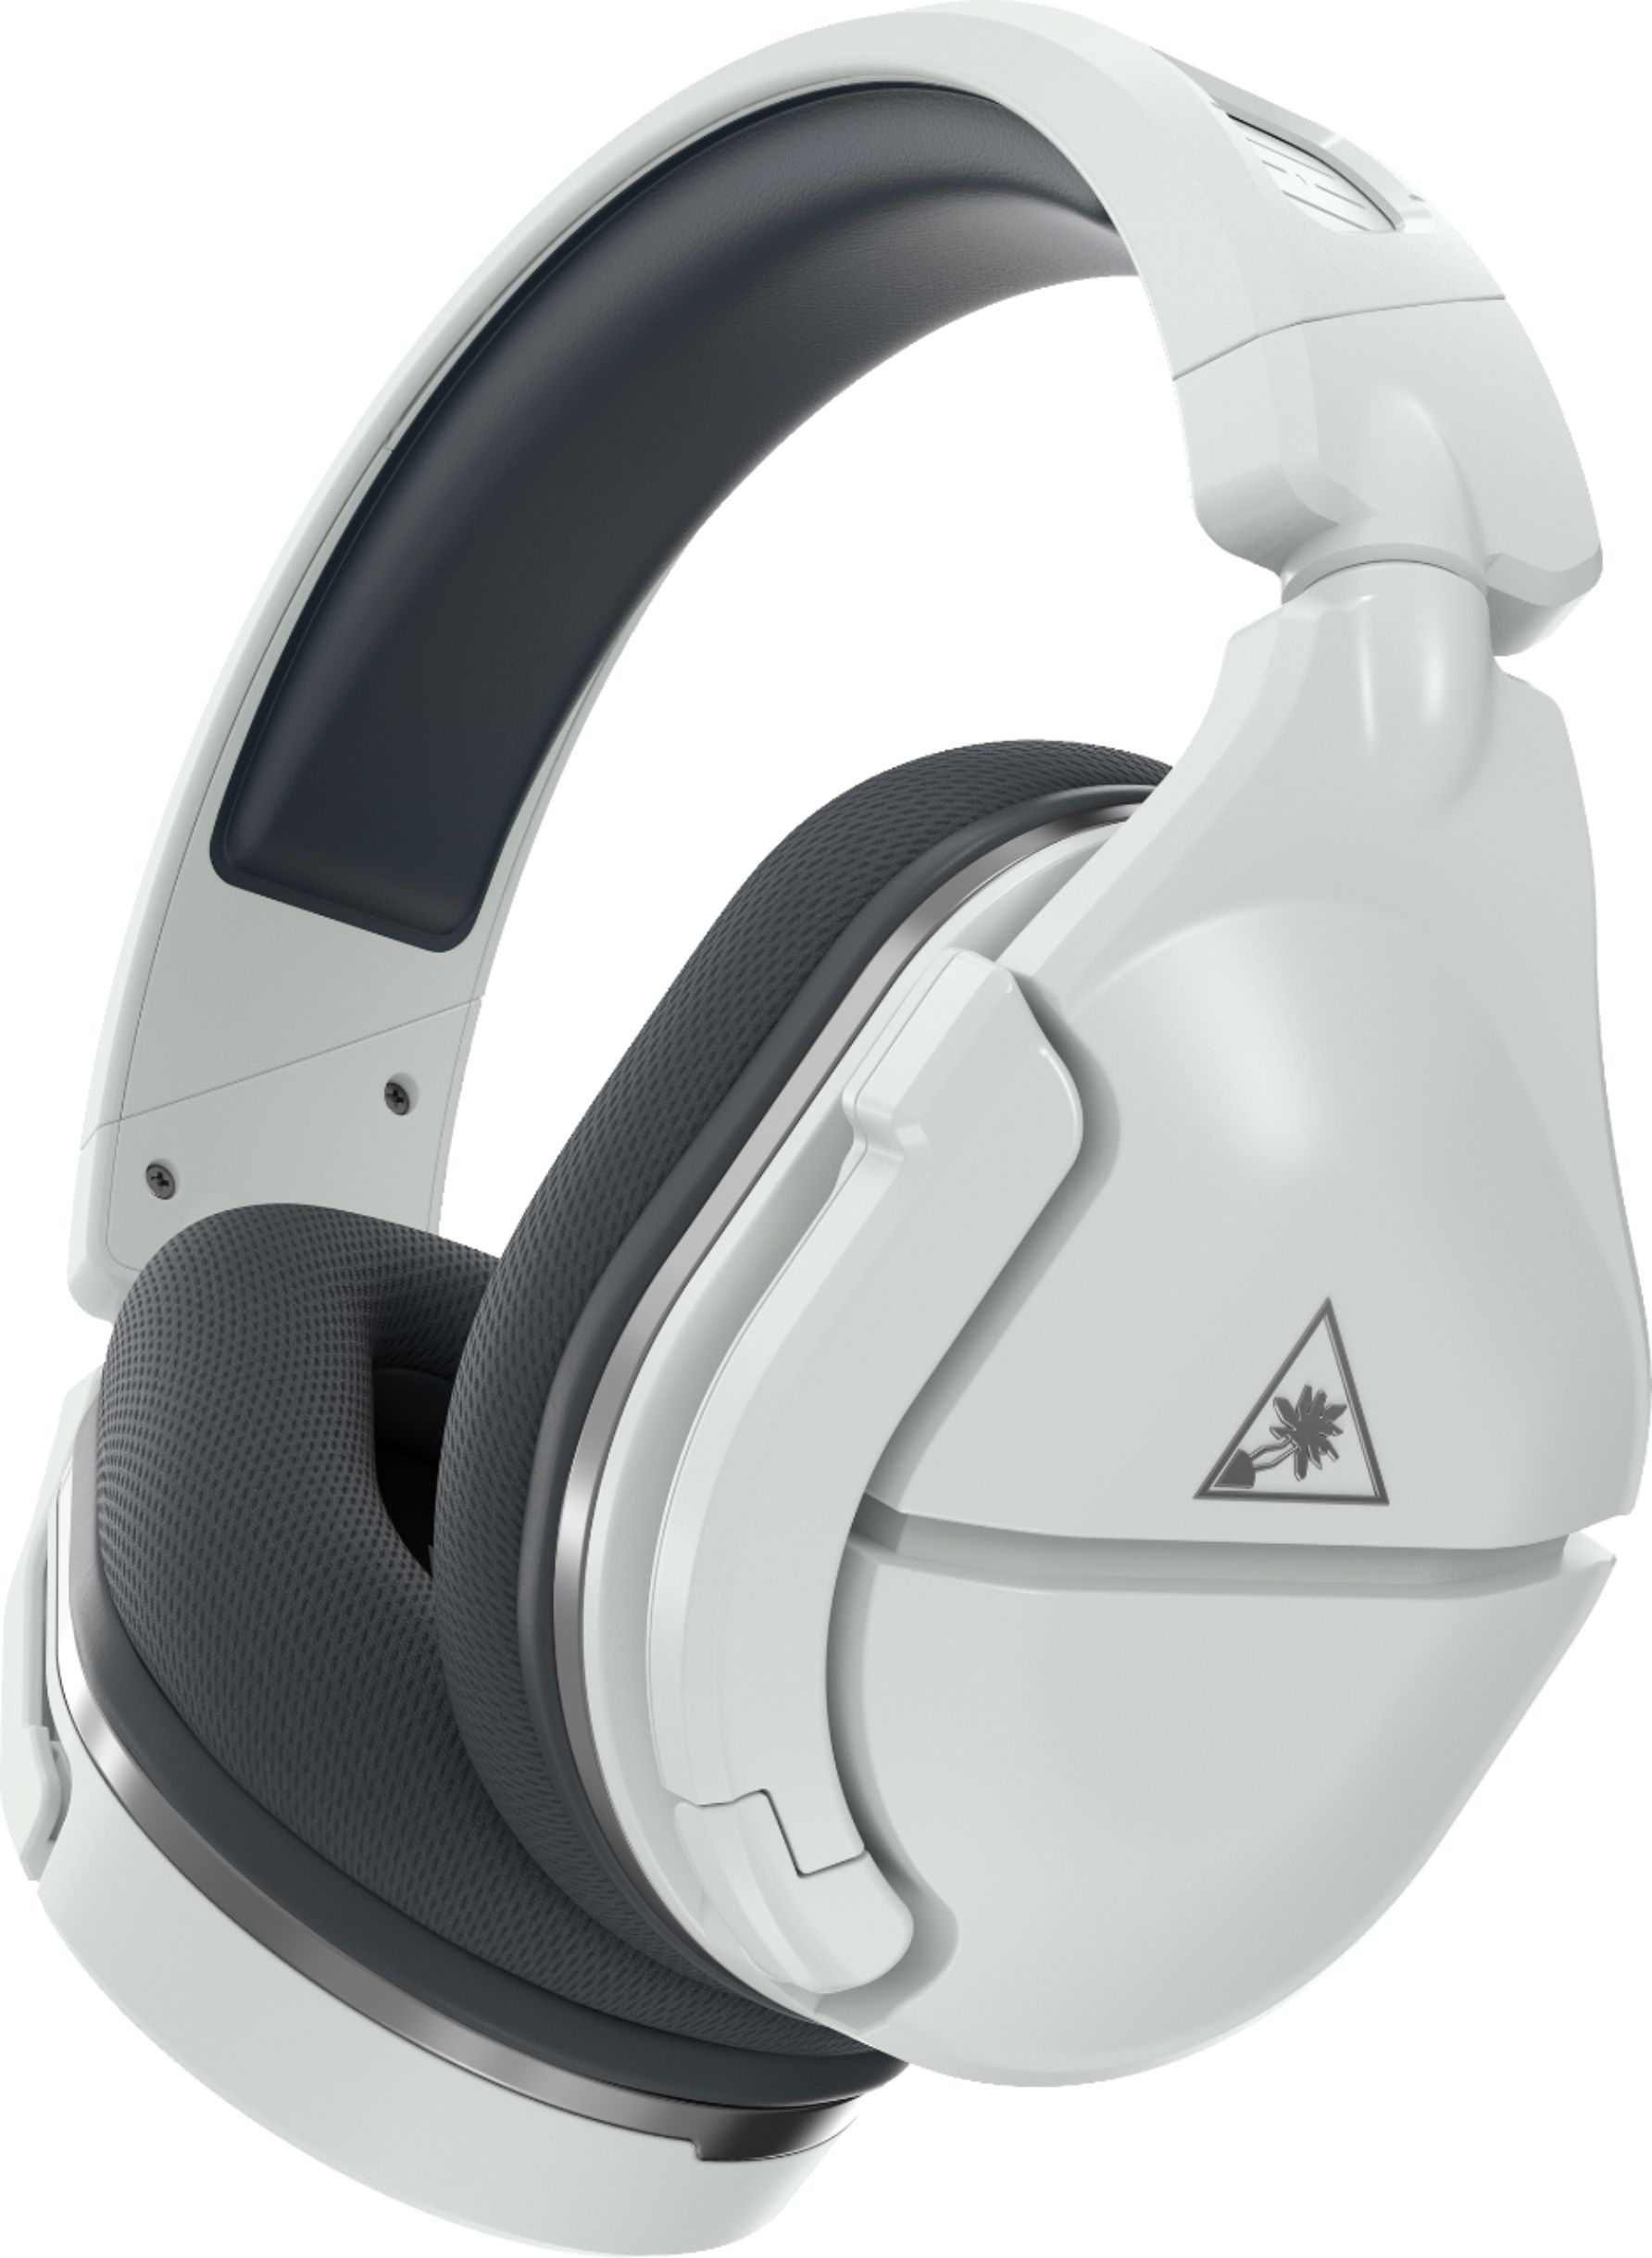 can 2 headsets be used on ps4